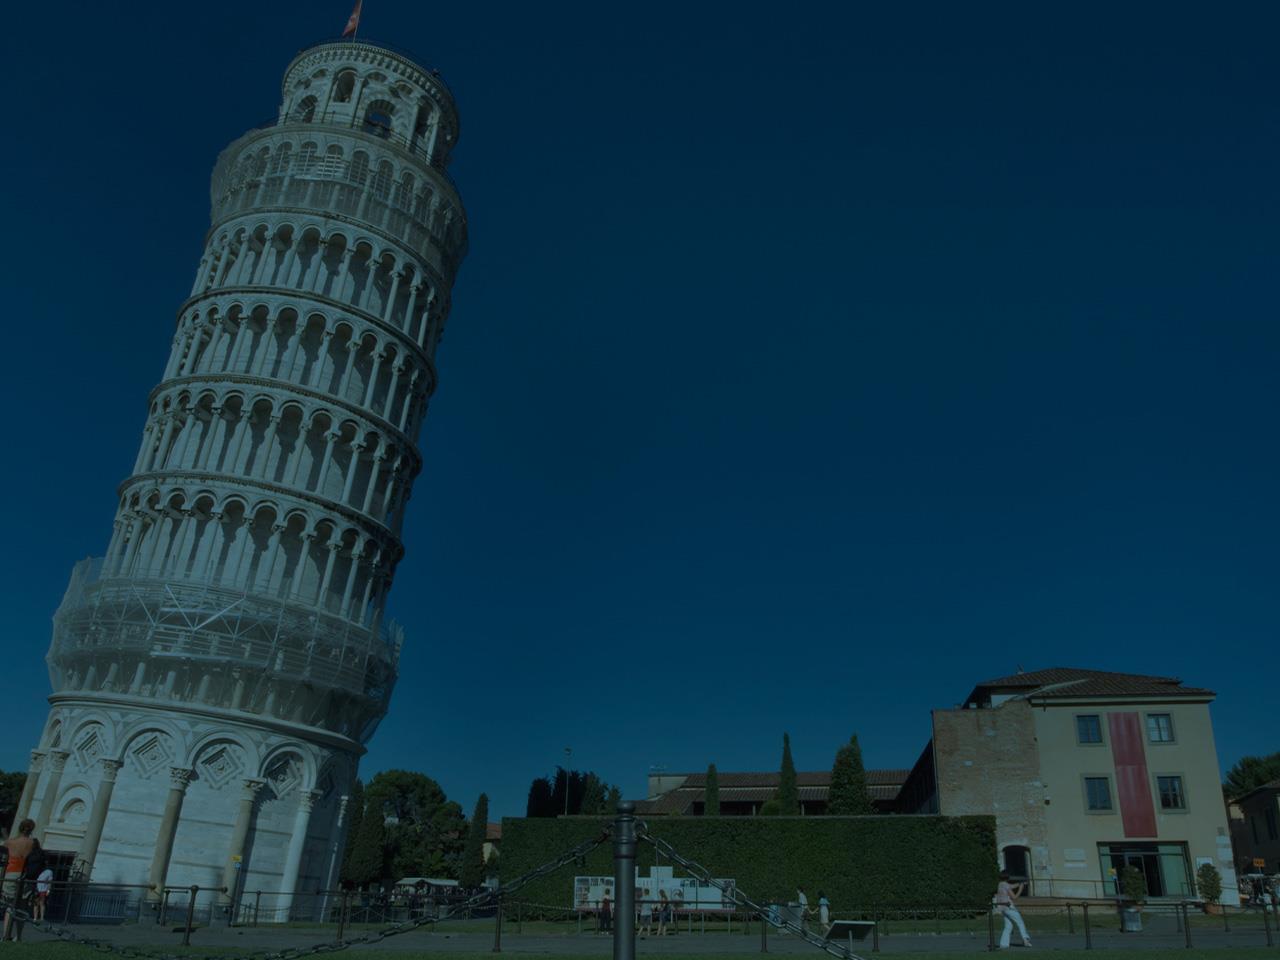 facts about the leaning tower of pisa facts about the leaning tower of pizza